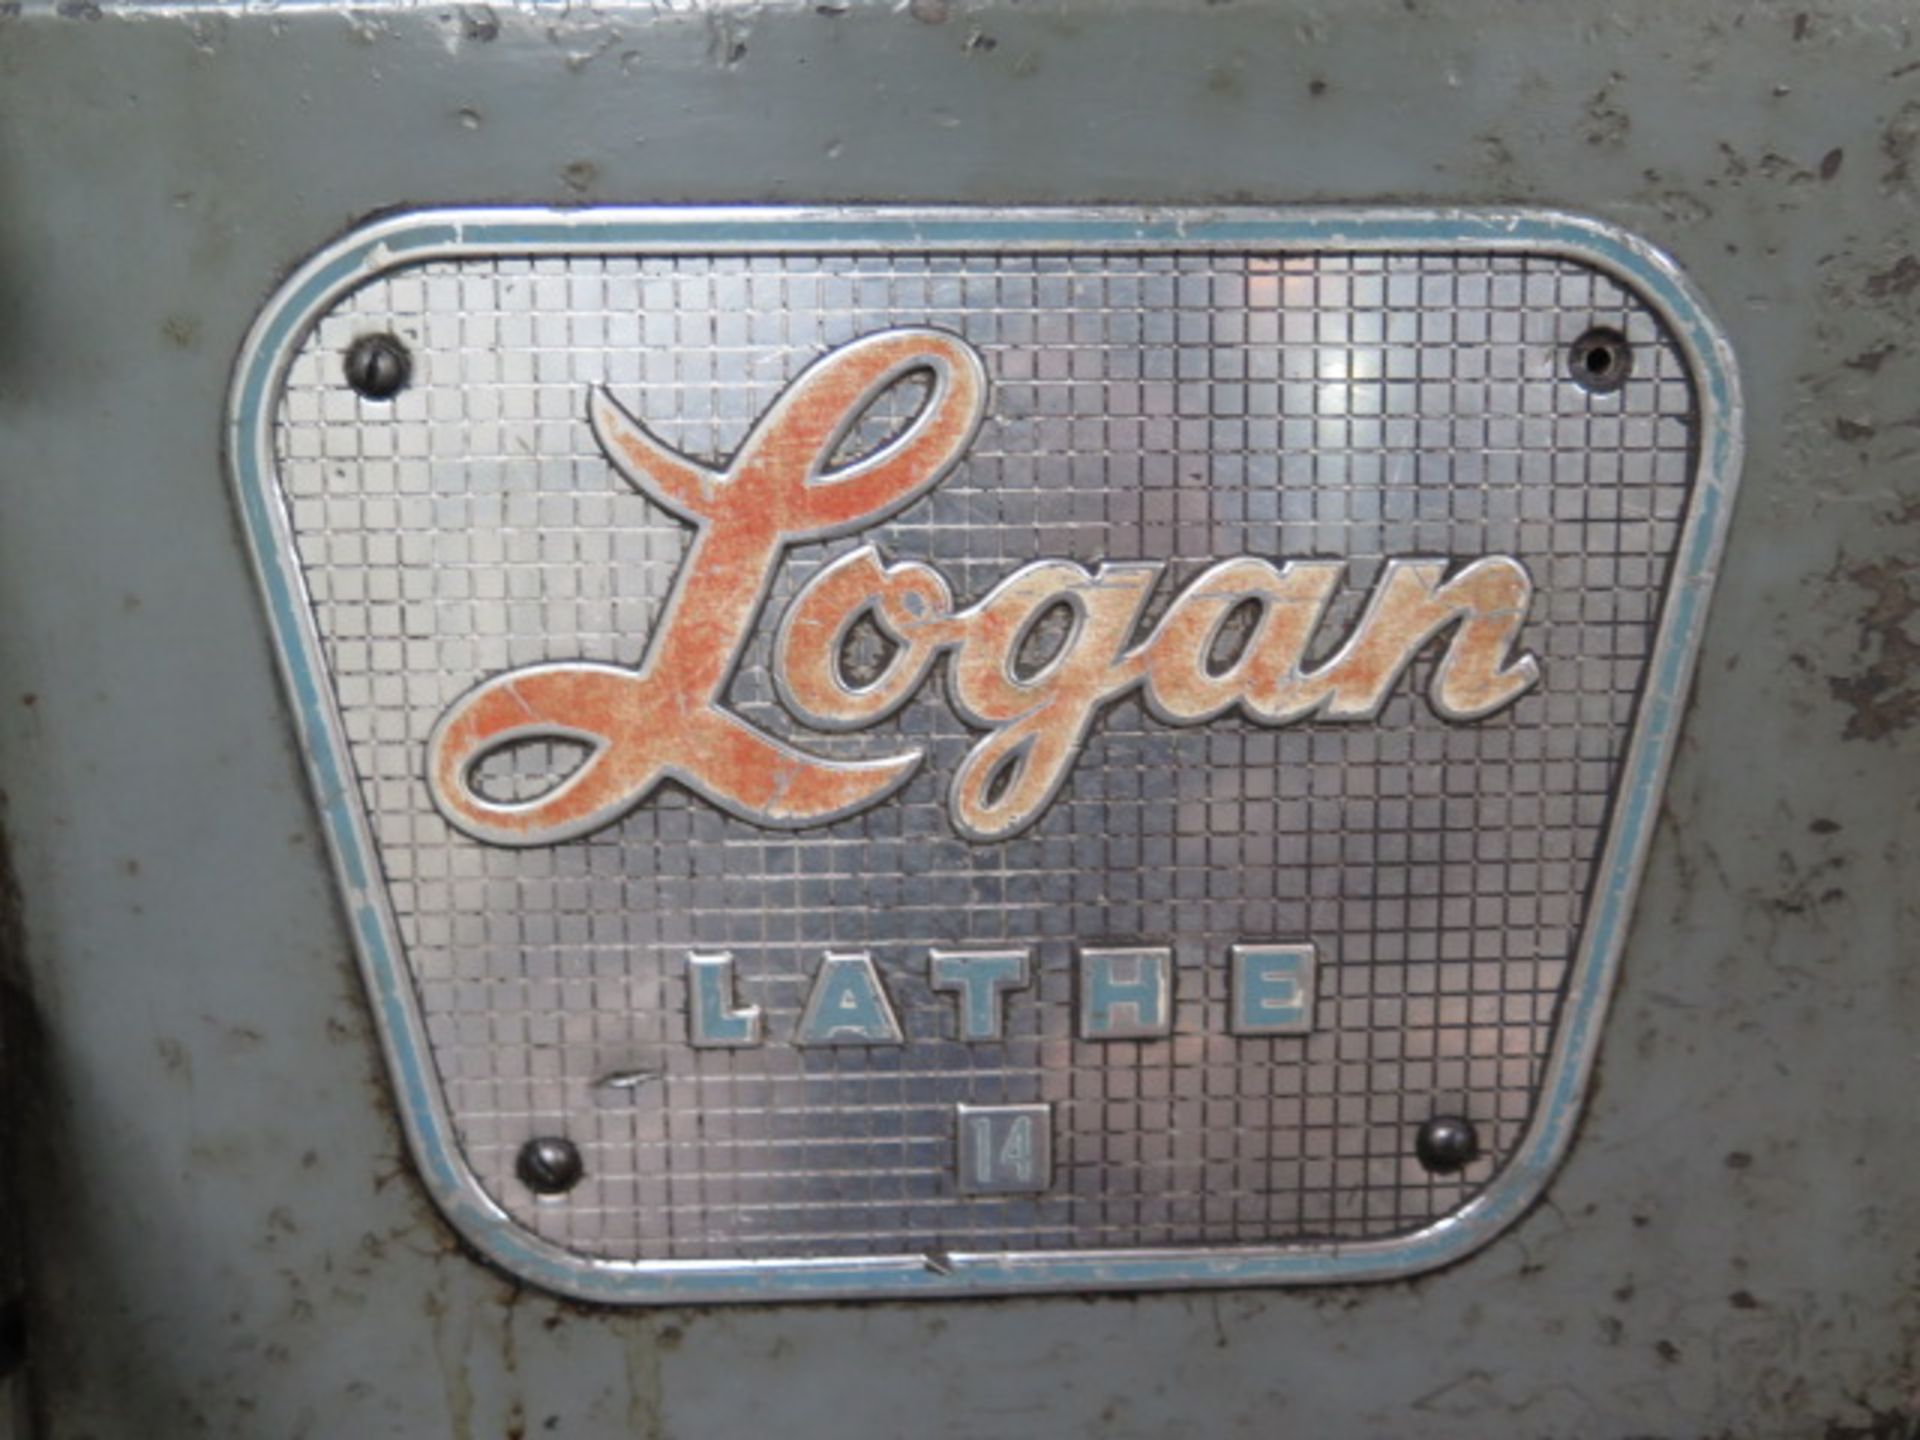 Logan 15” x 60” Lathe w/ 55-2000 Dial Change RPM, Inch Threading, Tailstock, KDK, SOLD AS IS - Image 10 of 10